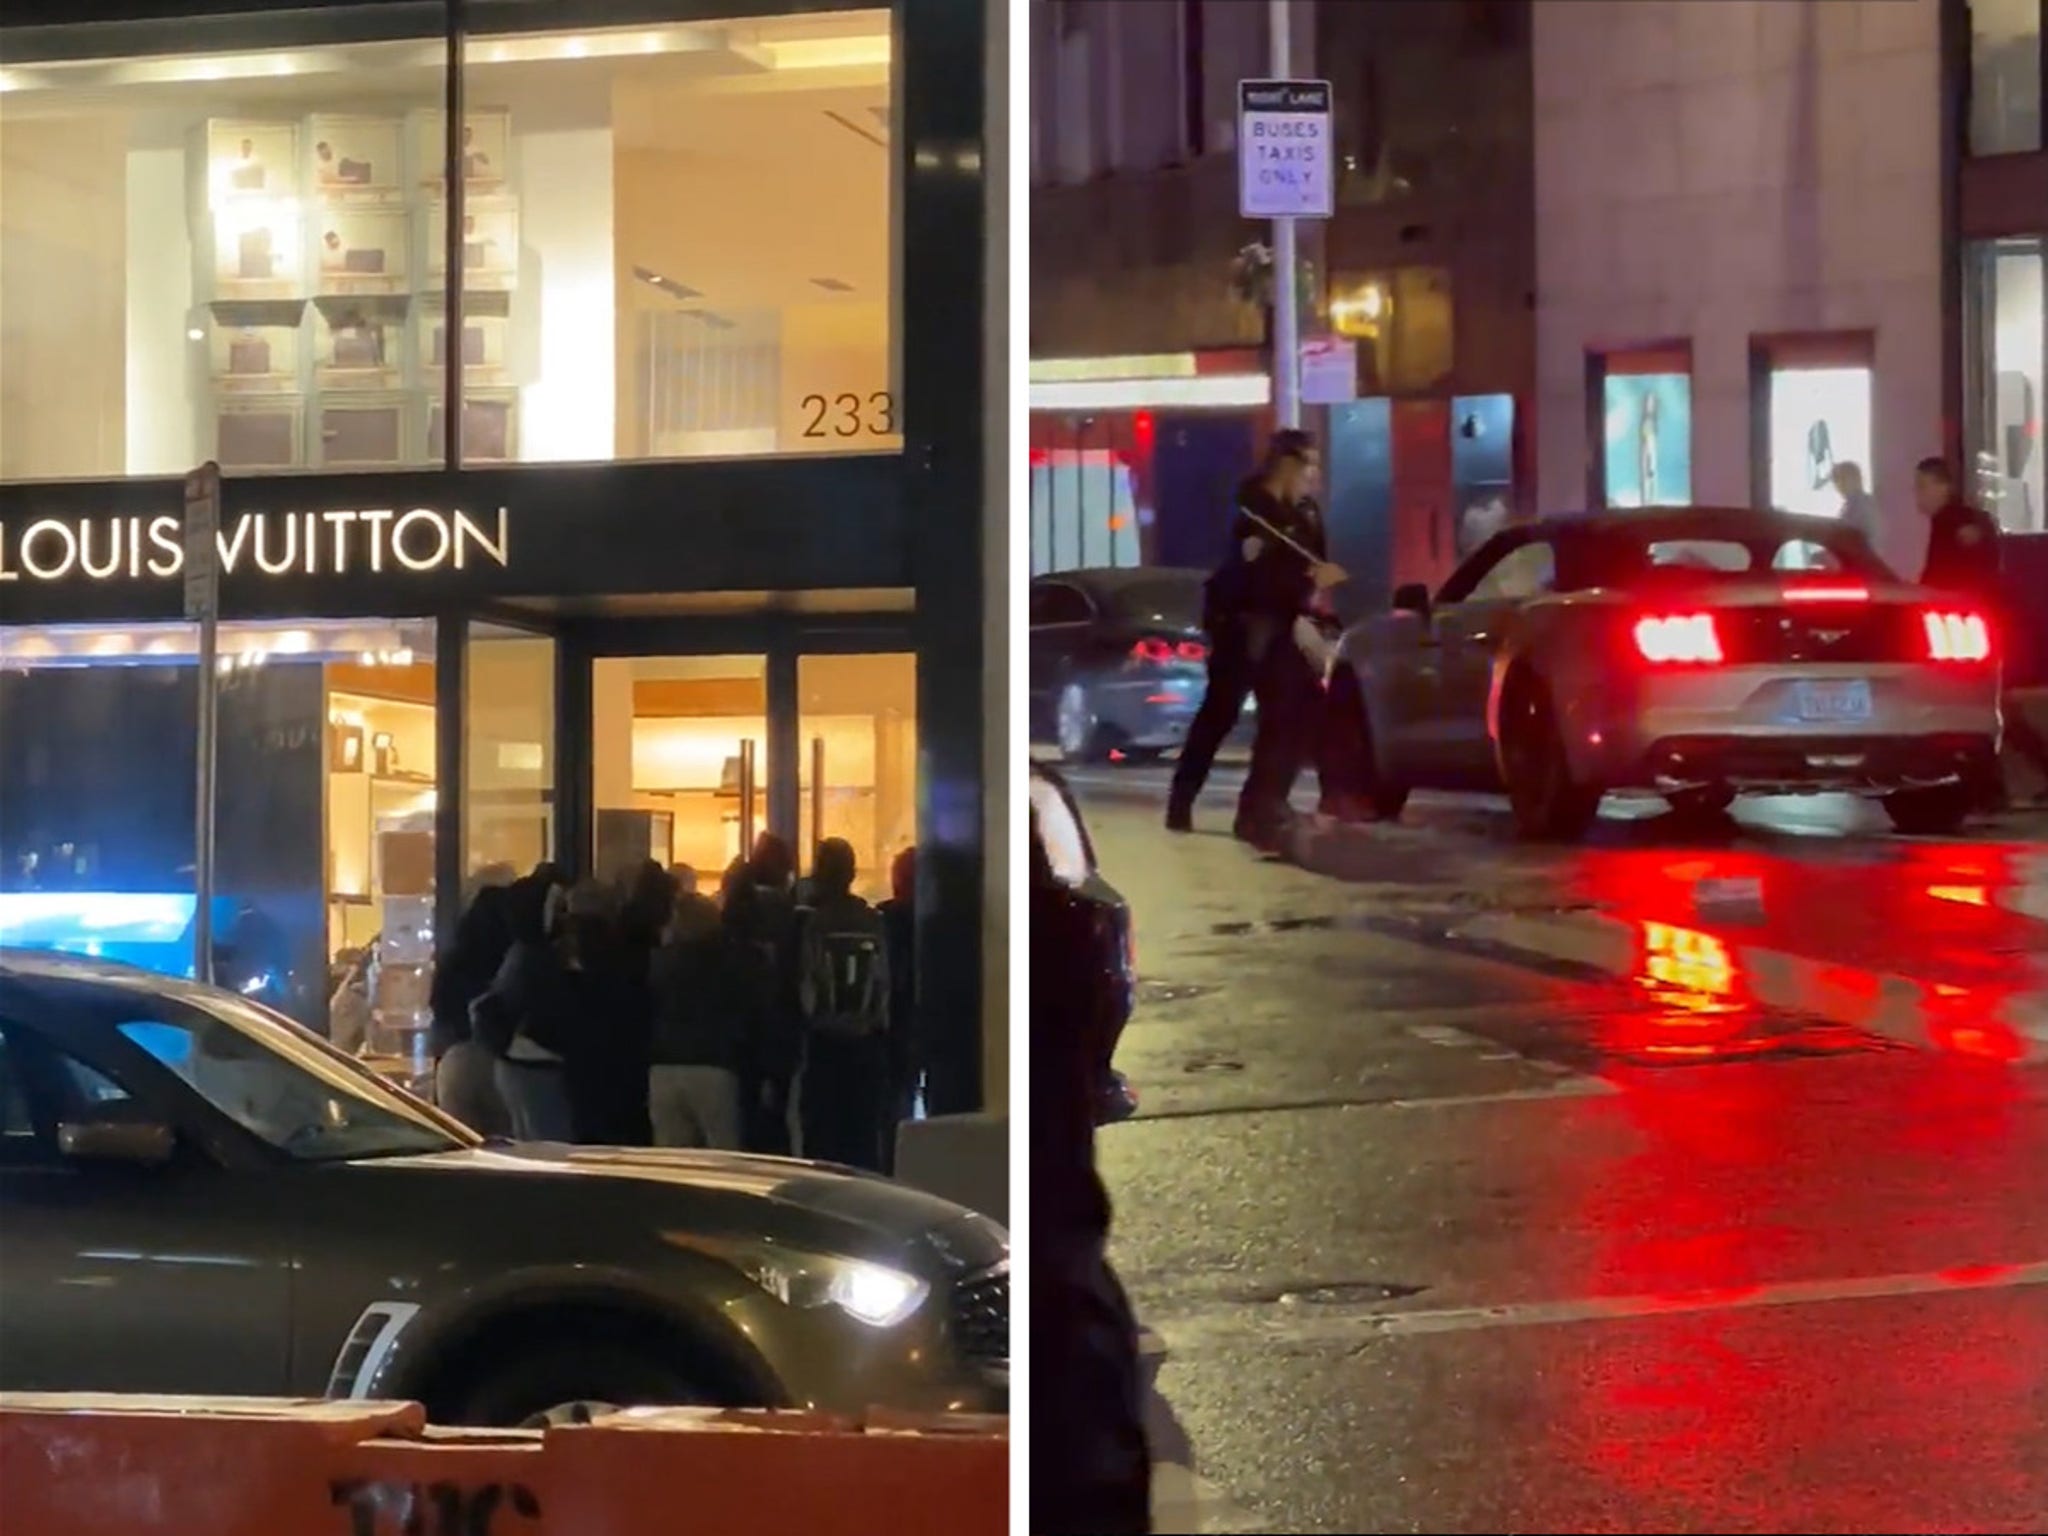 Louis Vuitton store in SF's Union Square 'emptied out' by thieves